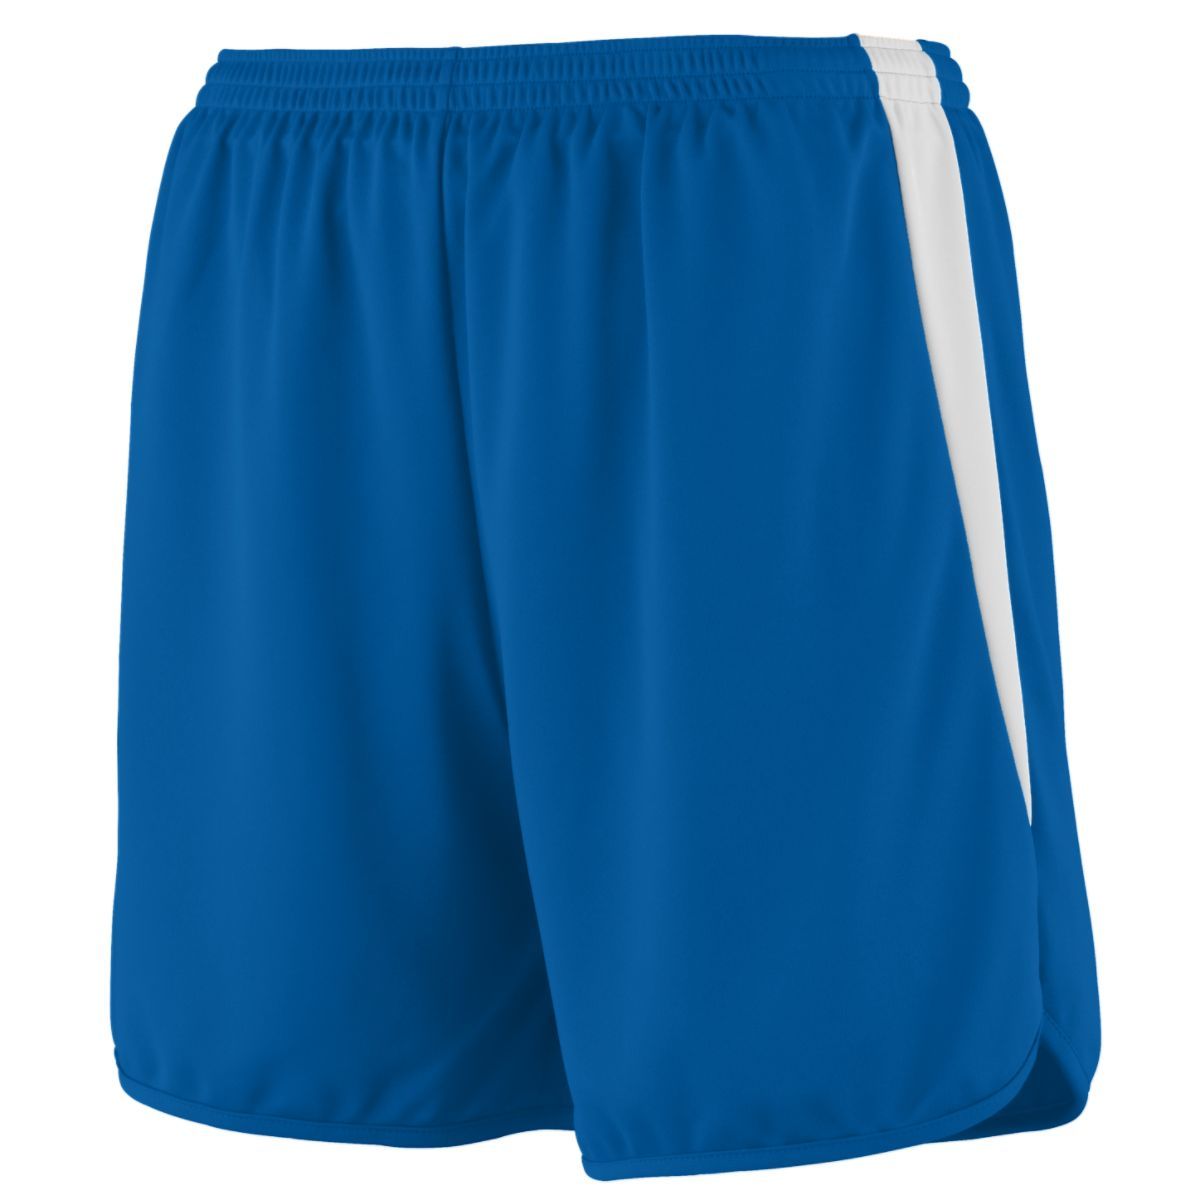 Youth Rapidpace Track Shorts - 346